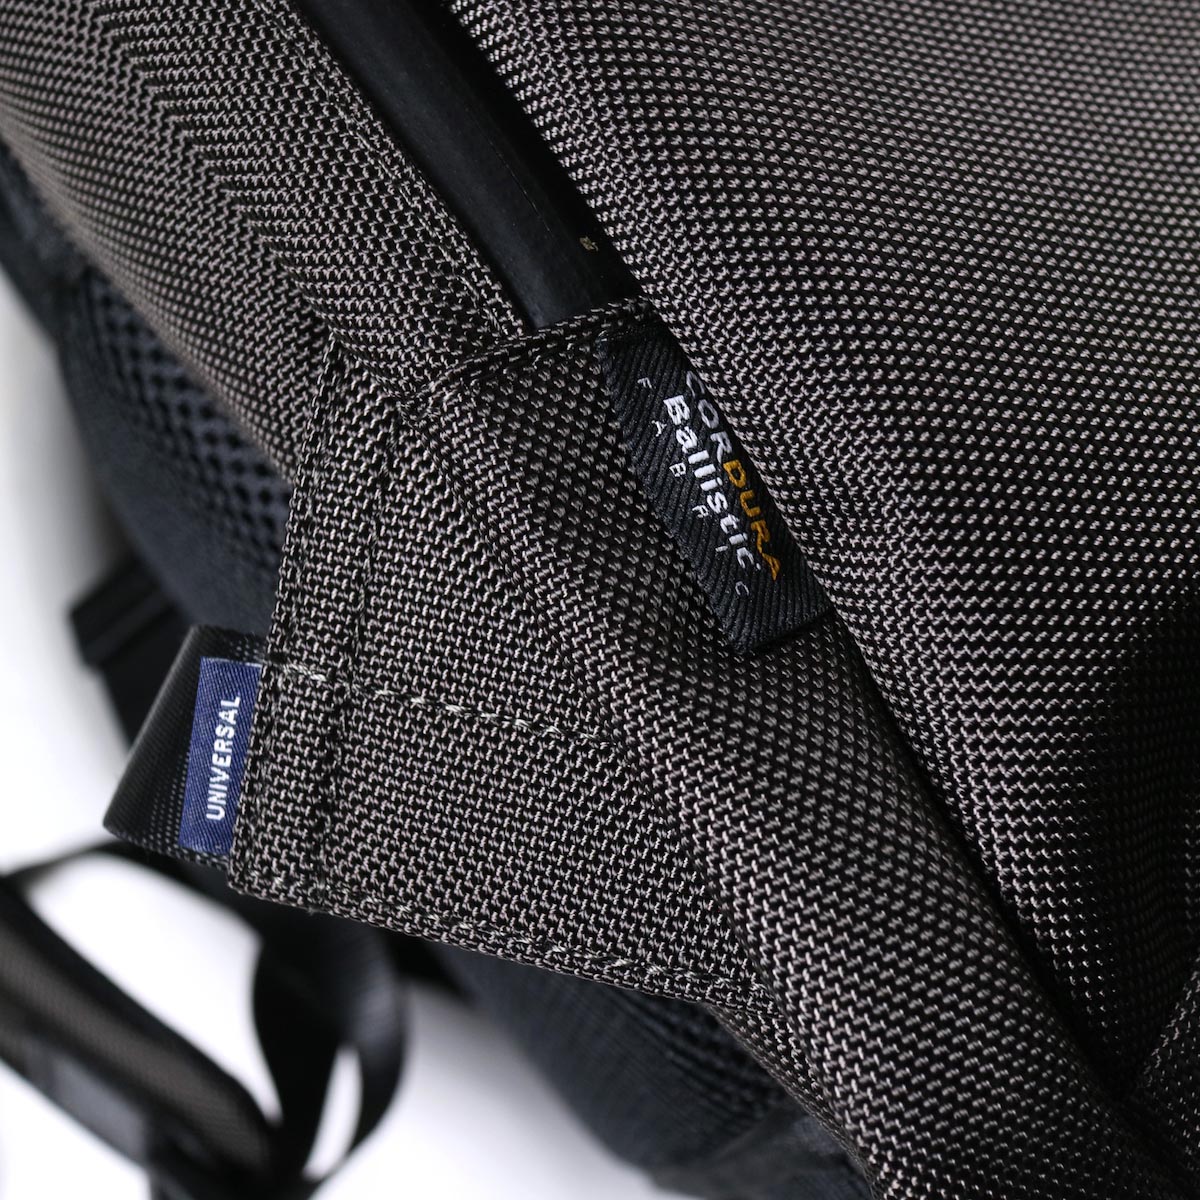 UNIVERSAL PRODUCTS / NEW UTILITY BAG (Charcoal)ネームタグ